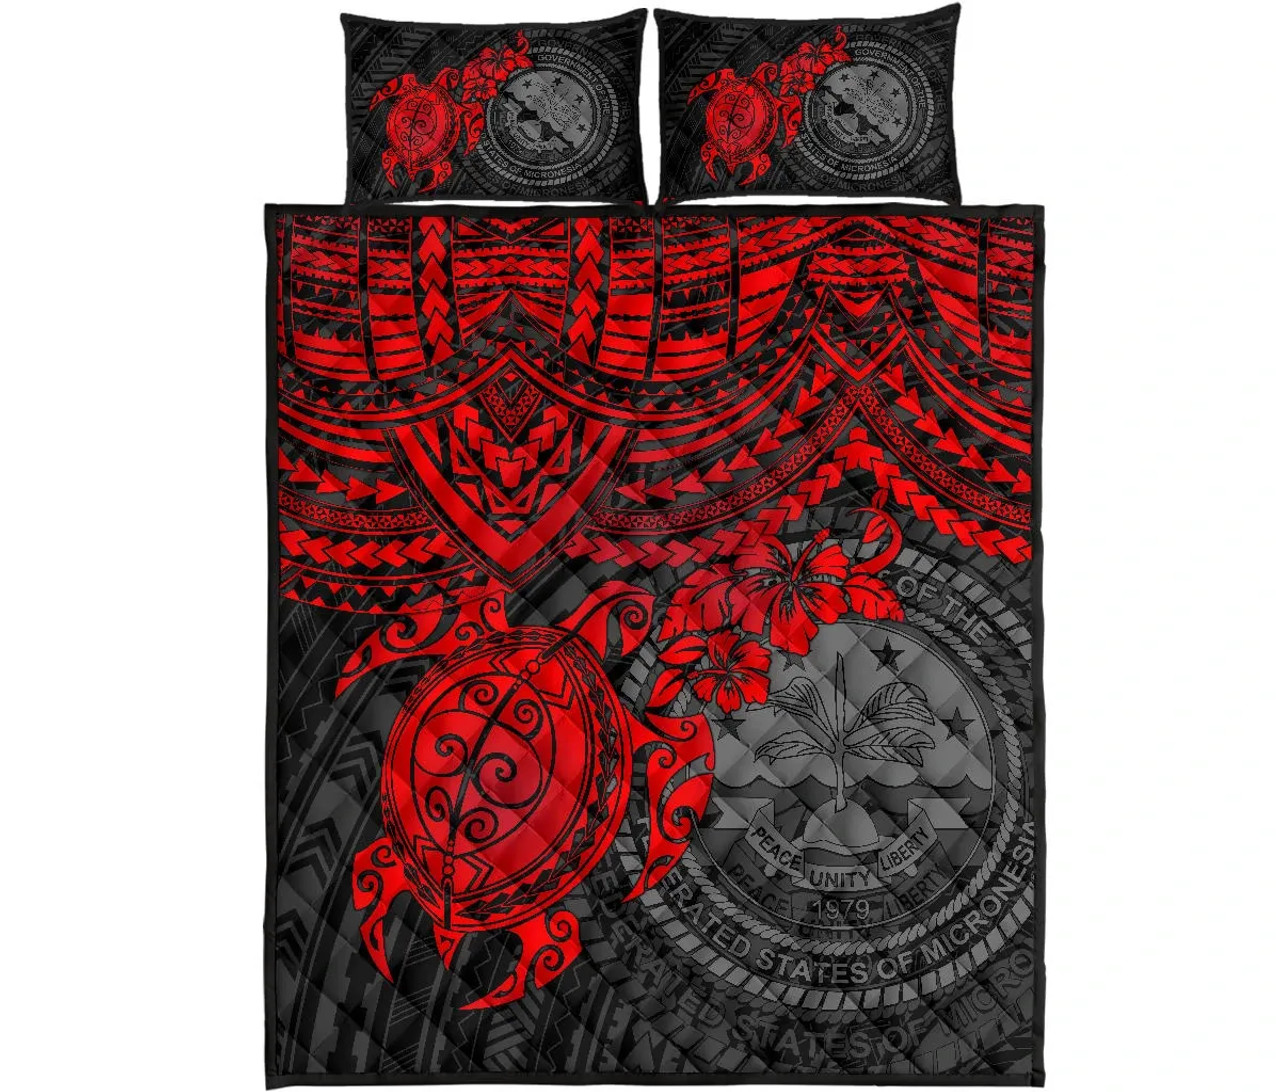 Federated States Of Micronesia Quilt Bed Set - Federated States Of Micronesia Seal & Red Turtle Hibiscus 5